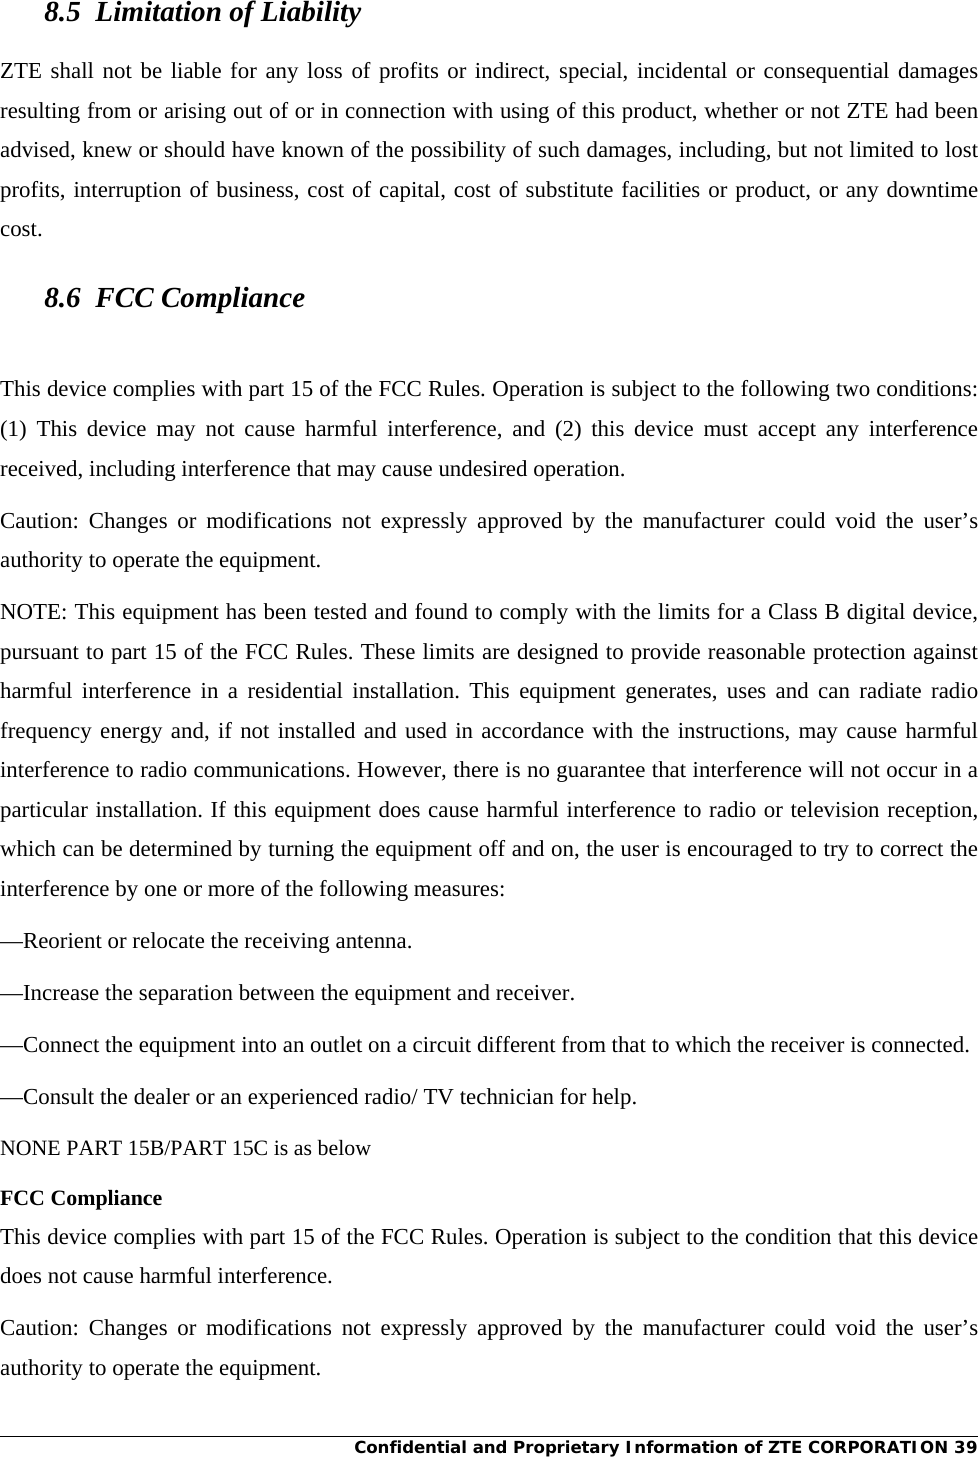 Confidential and Proprietary Information of ZTE CORPORATION 39 8.5  Limitation of Liability ZTE shall not be liable for any loss of profits or indirect, special, incidental or consequential damages resulting from or arising out of or in connection with using of this product, whether or not ZTE had been advised, knew or should have known of the possibility of such damages, including, but not limited to lost profits, interruption of business, cost of capital, cost of substitute facilities or product, or any downtime cost. 8.6 FCC Compliance  This device complies with part 15 of the FCC Rules. Operation is subject to the following two conditions: (1) This device may not cause harmful interference, and (2) this device must accept any interference received, including interference that may cause undesired operation.   Caution: Changes or modifications not expressly approved by the manufacturer could void the user’s authority to operate the equipment.   NOTE: This equipment has been tested and found to comply with the limits for a Class B digital device, pursuant to part 15 of the FCC Rules. These limits are designed to provide reasonable protection against harmful interference in a residential installation. This equipment generates, uses and can radiate radio frequency energy and, if not installed and used in accordance with the instructions, may cause harmful interference to radio communications. However, there is no guarantee that interference will not occur in a particular installation. If this equipment does cause harmful interference to radio or television reception, which can be determined by turning the equipment off and on, the user is encouraged to try to correct the interference by one or more of the following measures: —Reorient or relocate the receiving antenna. —Increase the separation between the equipment and receiver. —Connect the equipment into an outlet on a circuit different from that to which the receiver is connected. —Consult the dealer or an experienced radio/ TV technician for help.  NONE PART 15B/PART 15C is as below  FCC Compliance This device complies with part 15 of the FCC Rules. Operation is subject to the condition that this device does not cause harmful interference. Caution: Changes or modifications not expressly approved by the manufacturer could void the user’s authority to operate the equipment. 